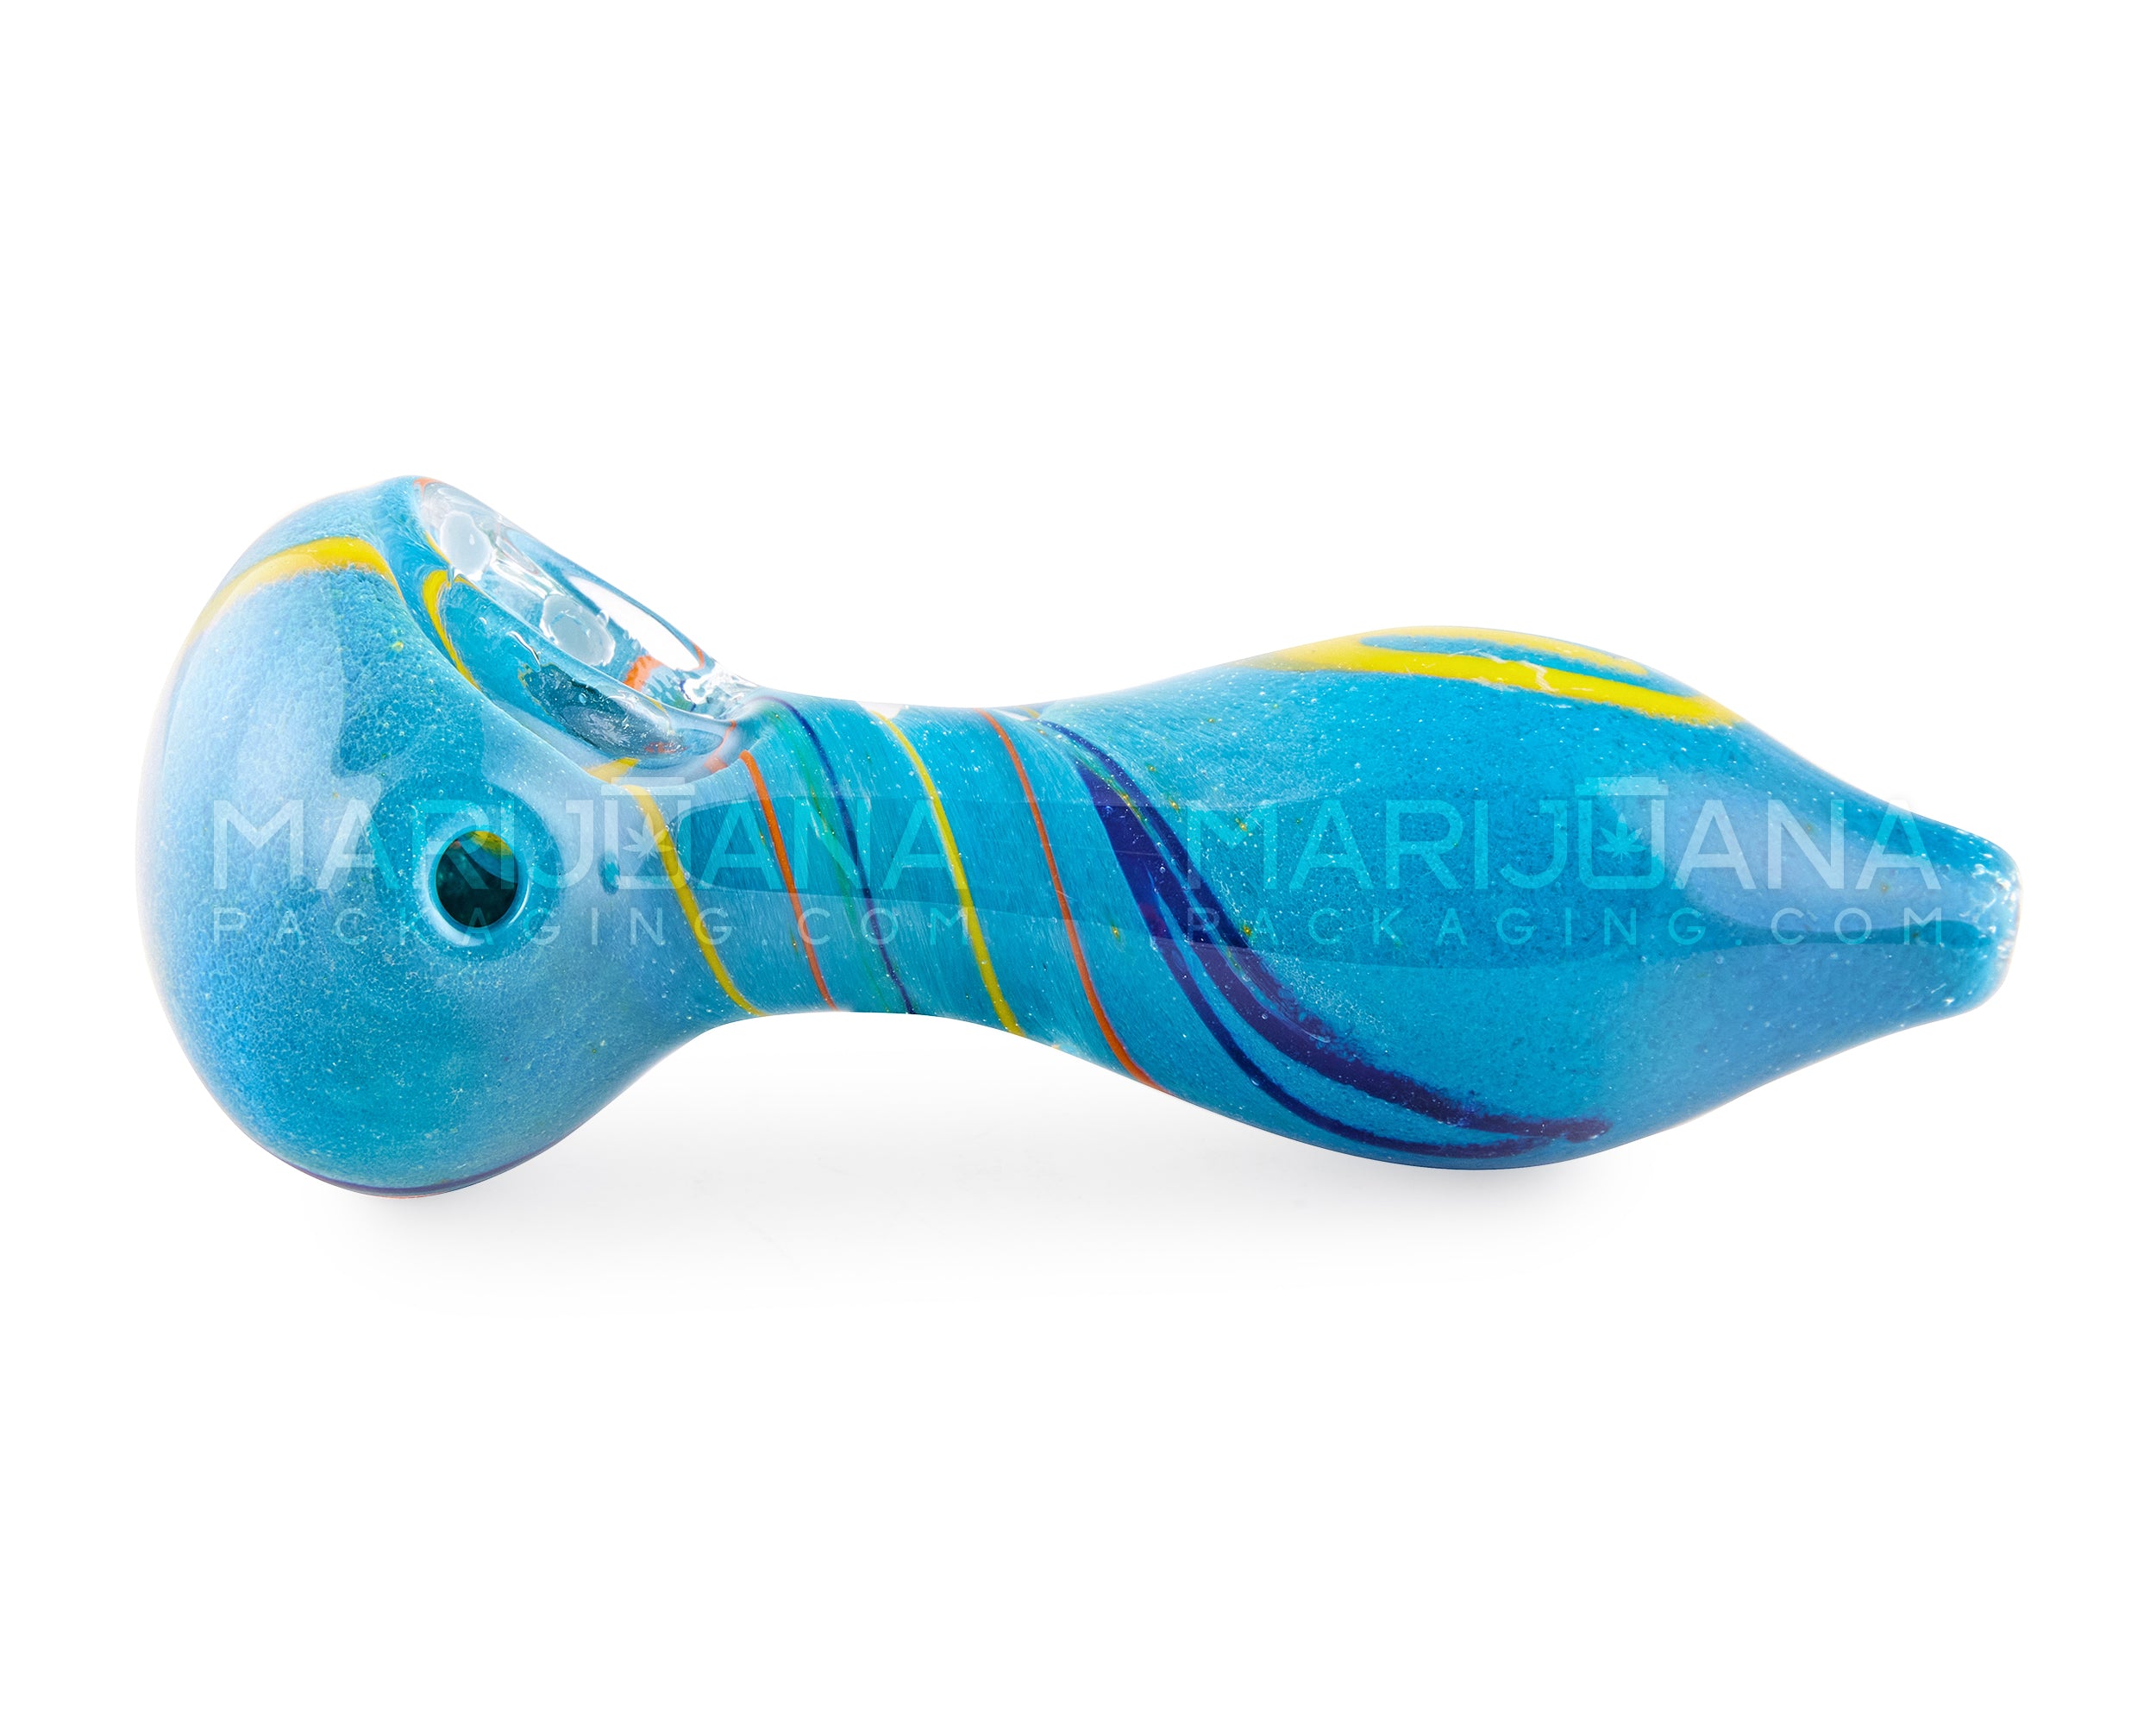 Spiral Galaxy Sherlock Hand Pipe w/ Multiple Horns | 4 in Long - Glass - Assorted - 4